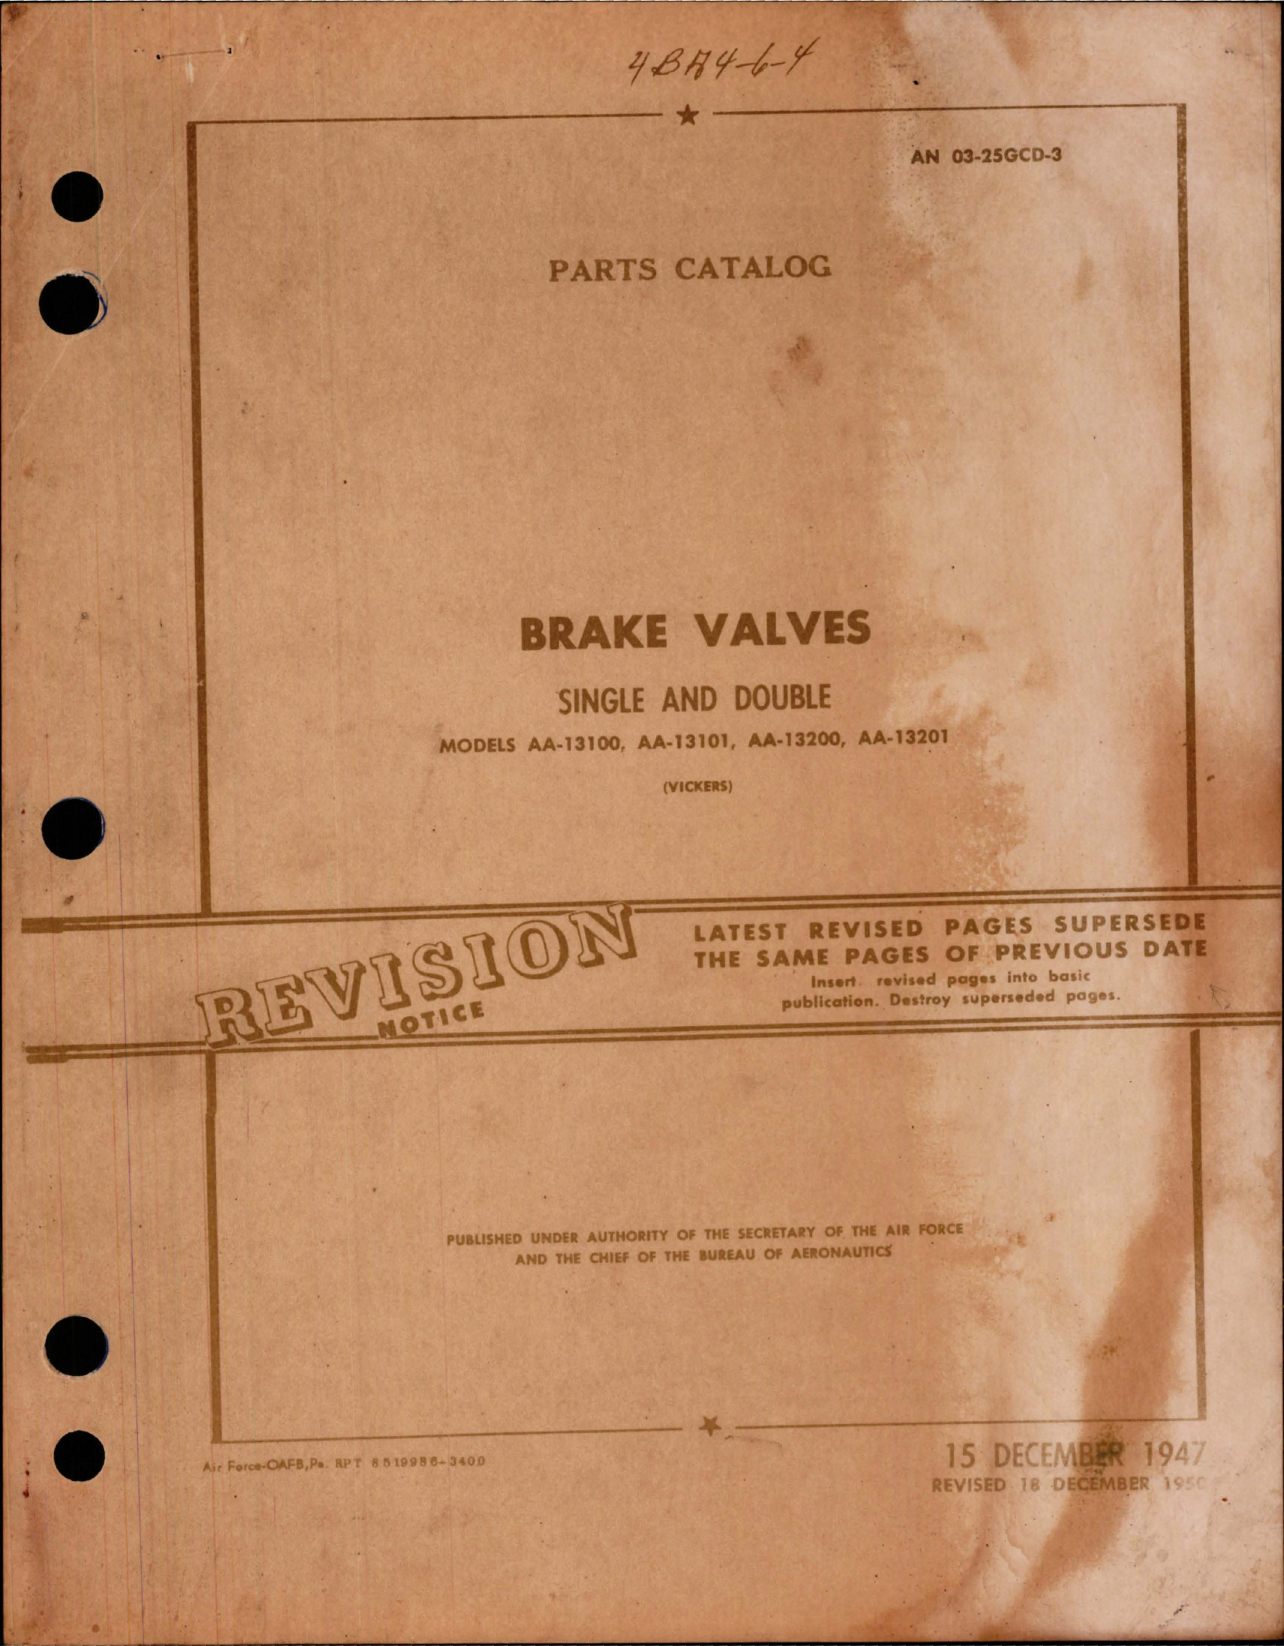 Sample page 1 from AirCorps Library document: Parts Catalog for Single & Double Brake Valves - Models AA-13100, AA-13101, AA-13200, and AA-131201